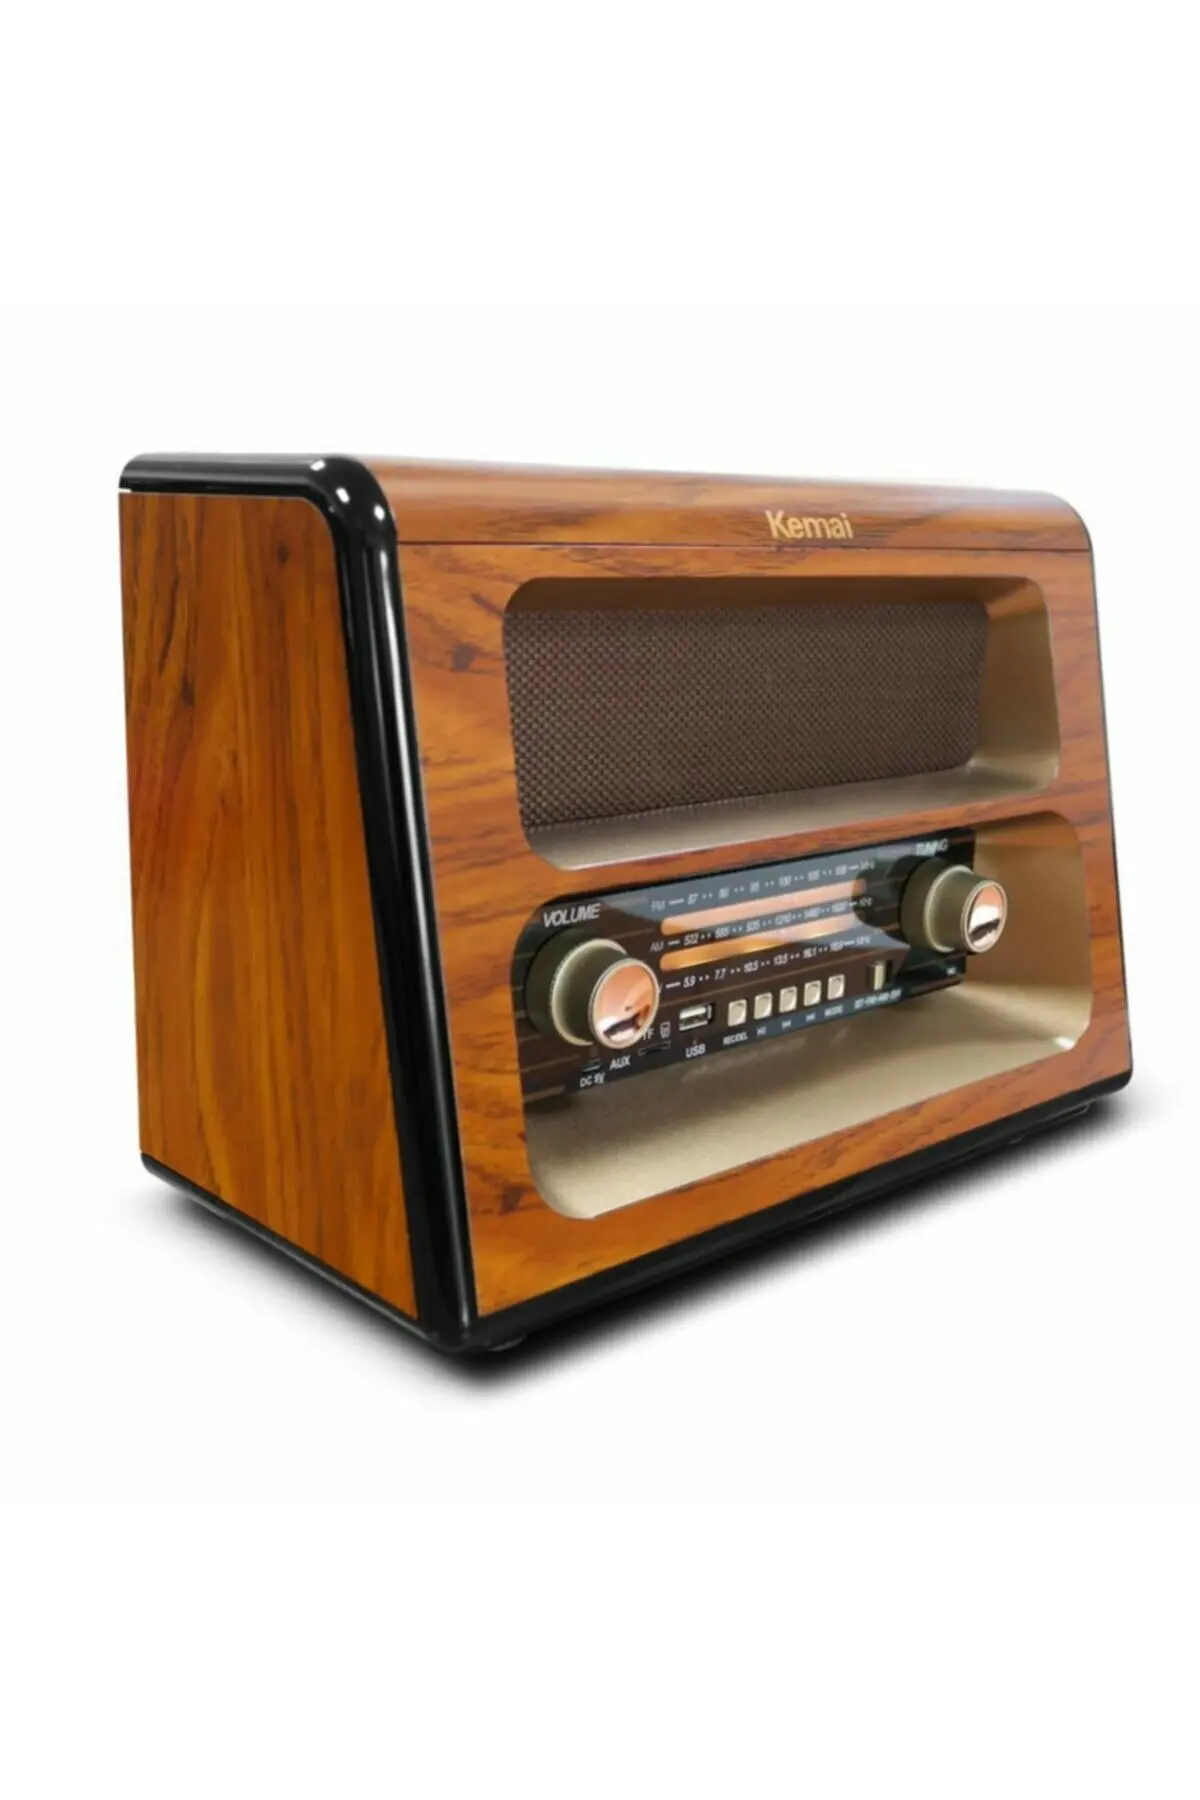 Enlarge Nostalgia newest Rechargeable Radio Bluetooth Speaker Wooden Radio with Remote Control